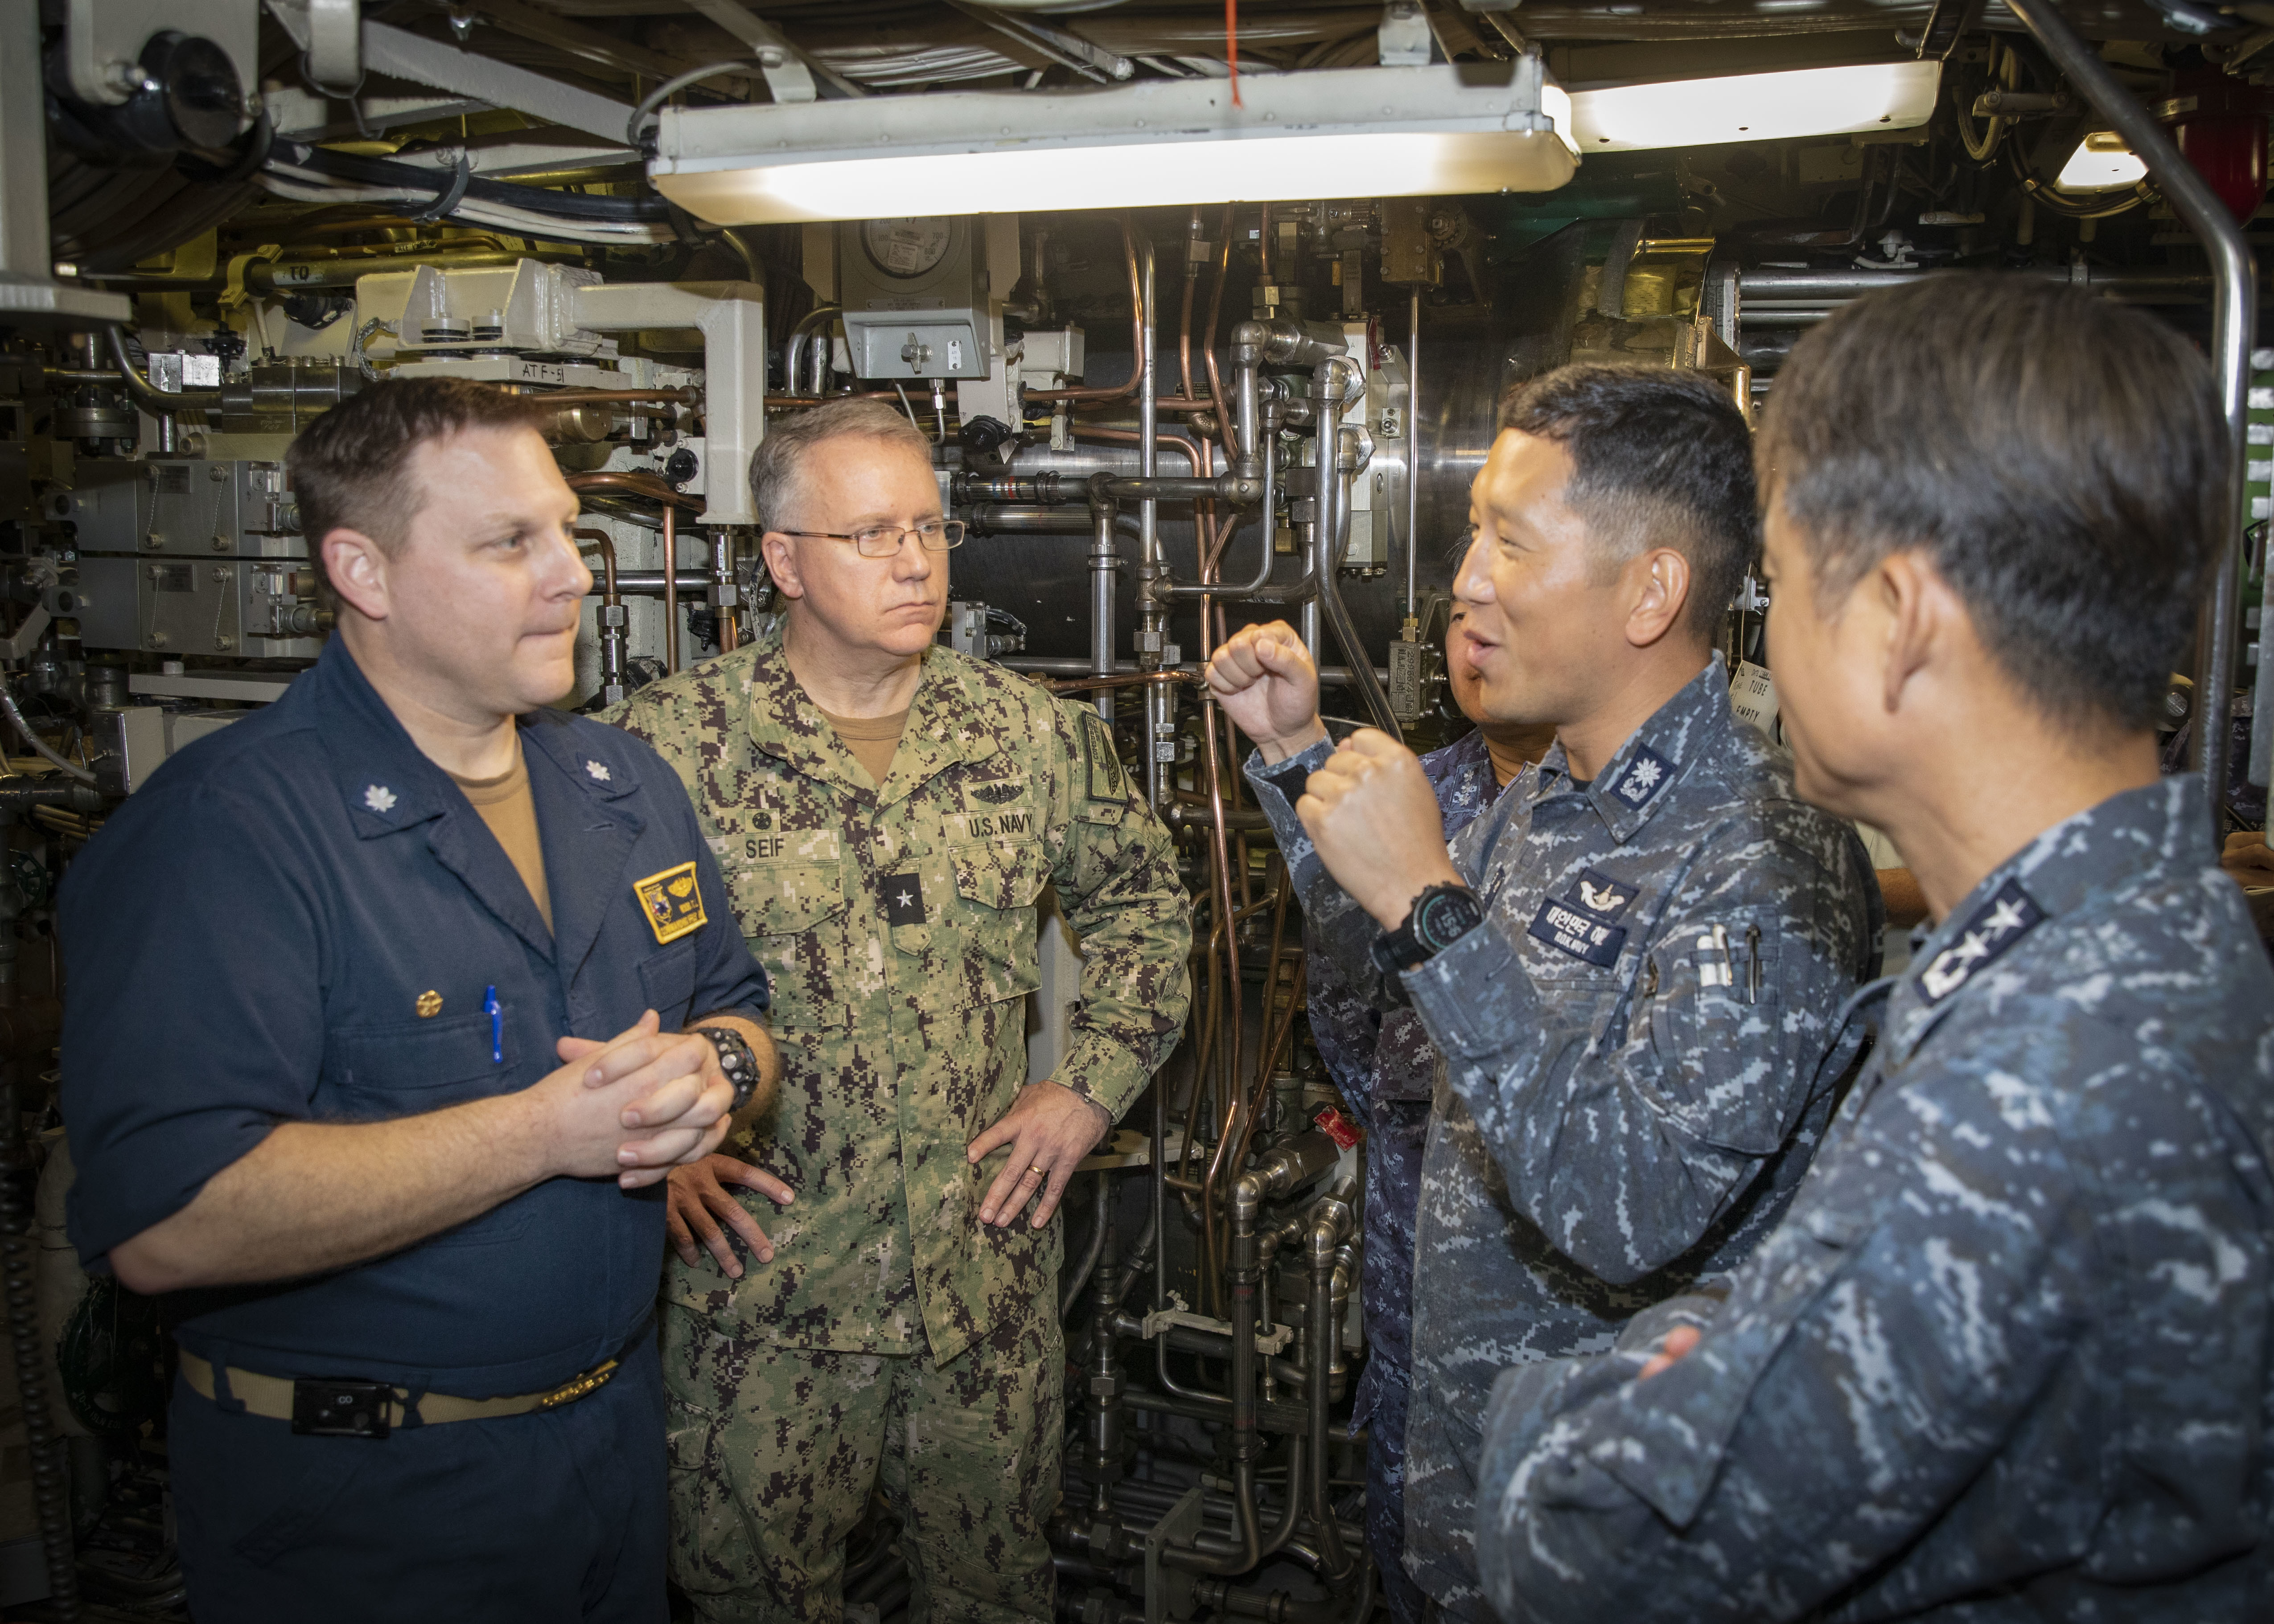 U.S. Navy Cmdr. Travis Wood, commanding officer of Ohio-class ballistic-missile submarine USS Maine (SSBN 741) Gold Crew, left; U.S. Navy Rear Adm. Rick Seif, commander, Submarine Group 7 (second from left); Republic of Korea (ROK) Navy Rear Adm. Su Youl Lee (far right), commander, Submarine Force; and ROK Navy Lt. Cmdr. Dongkeon Oh, executive officer of ROK Navy submarine ROKS SON WON IL (SS-072); hold a conversation aboard Maine, April 18.